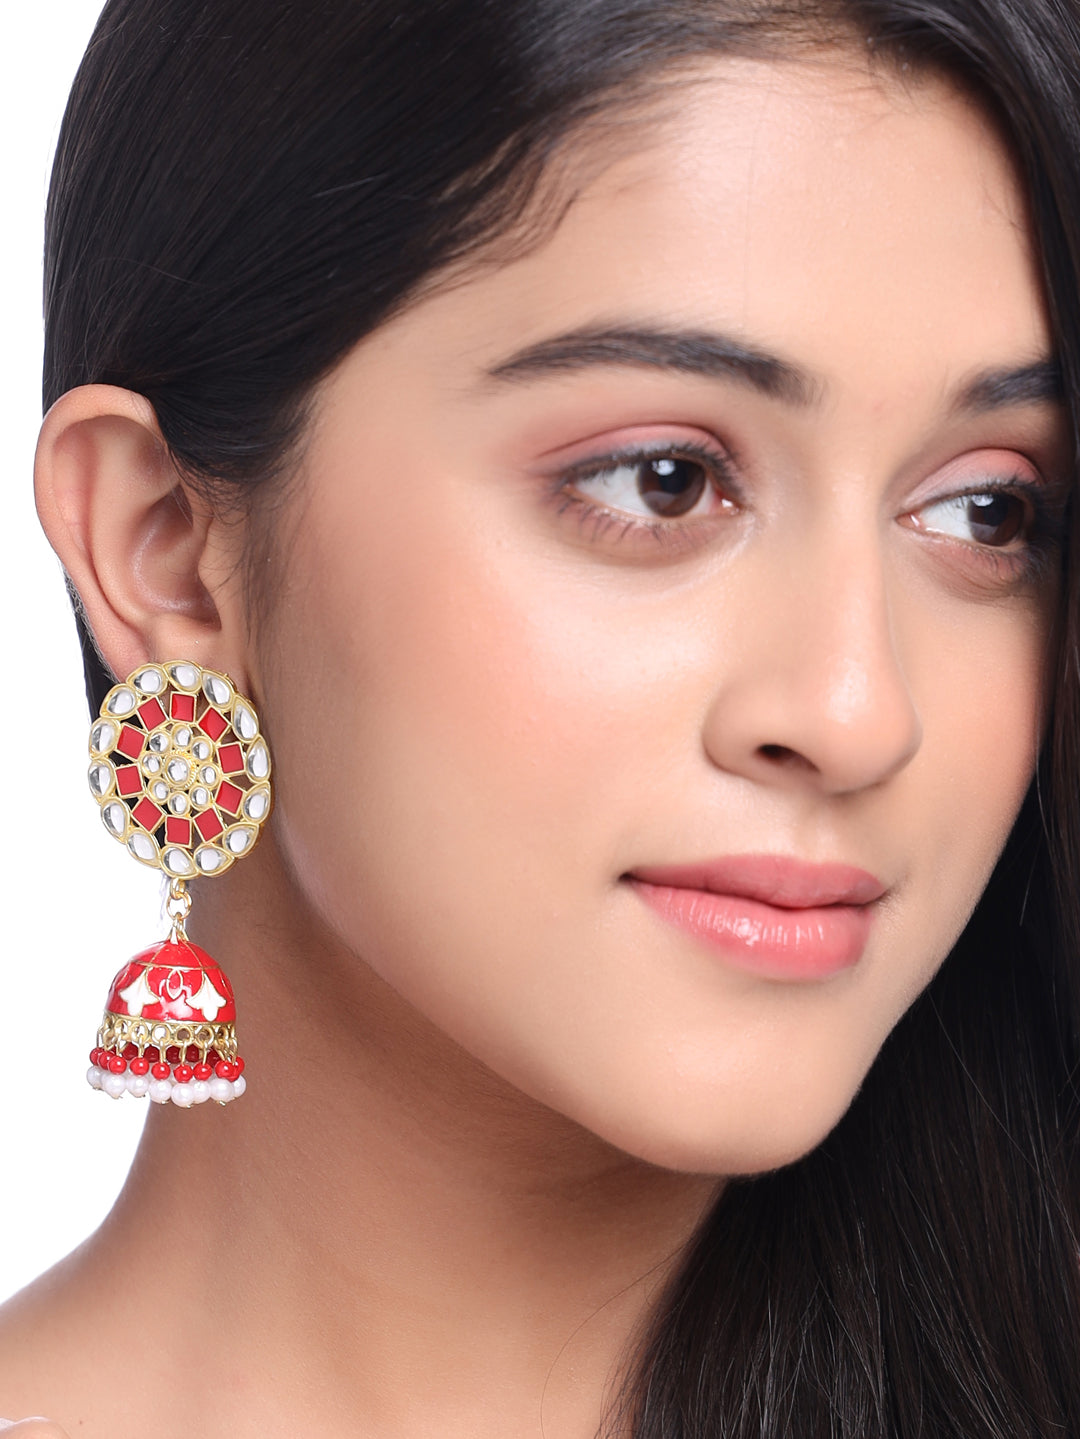 Women's Gold Plated Red Dome Shaped Meenkari Jhumkas Earrings - NVR